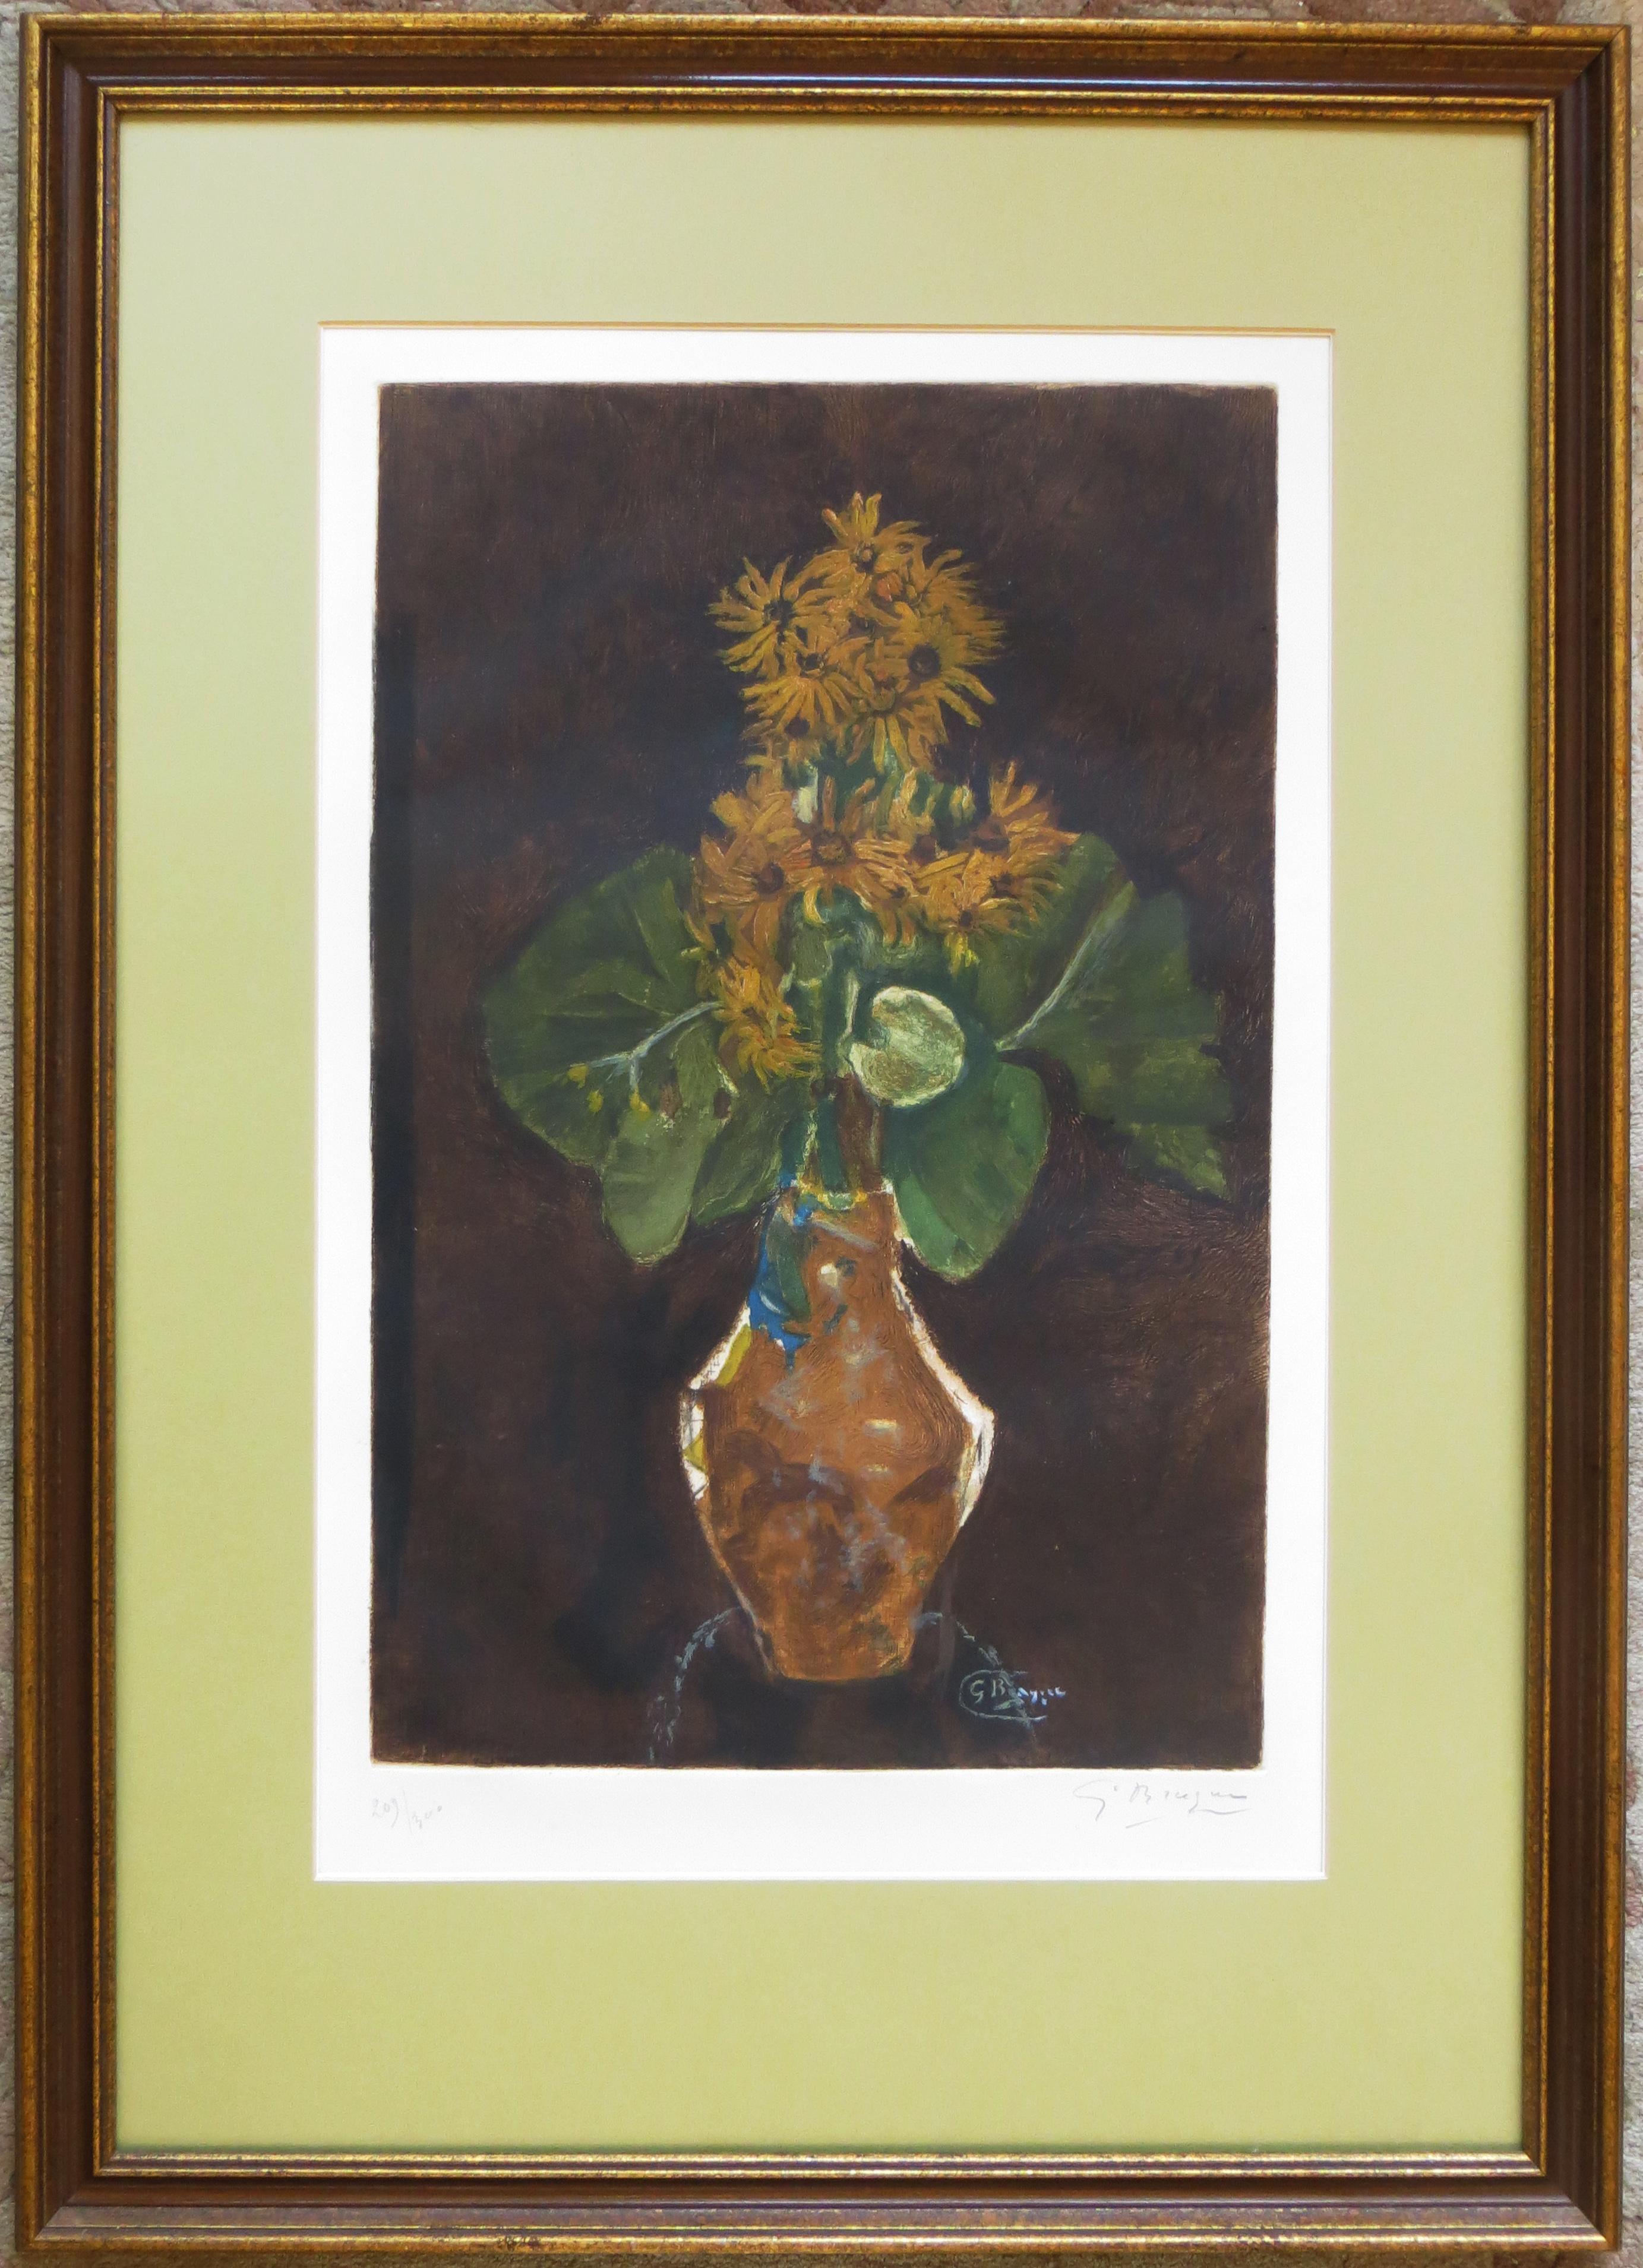 Les Marguerites (Daisies)  - Print by George Braque